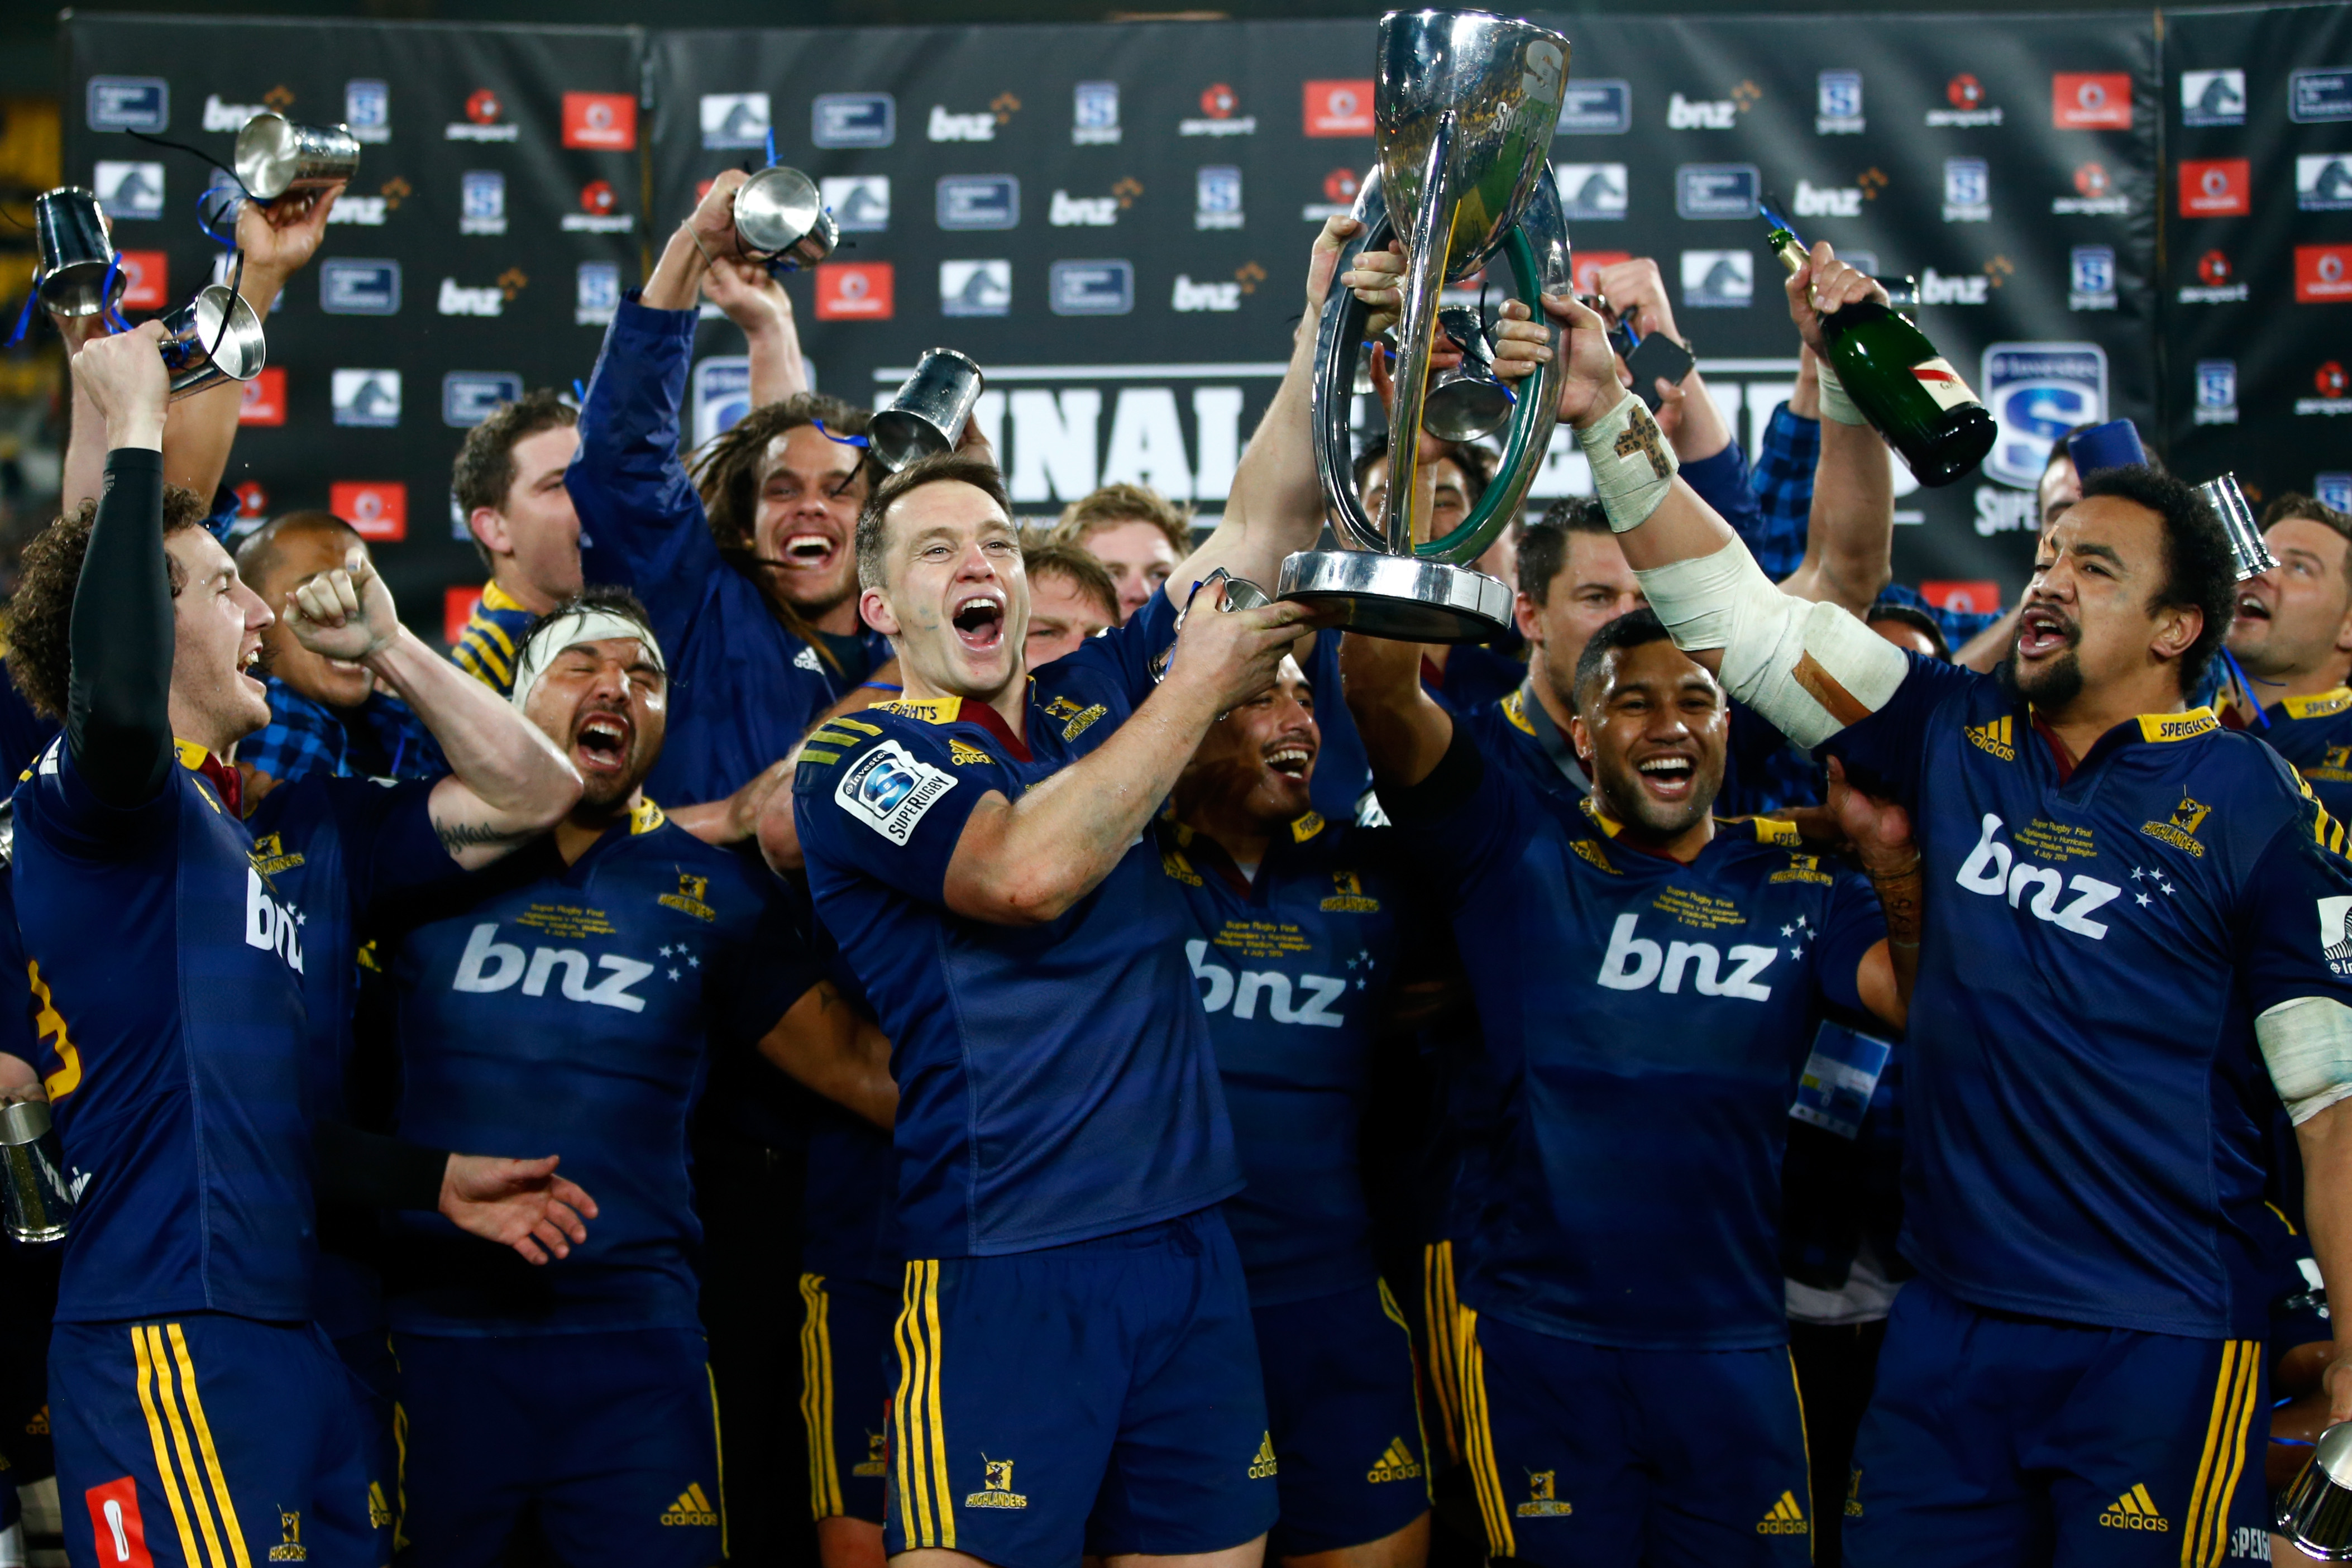 The Highlanders – The Highlanders Rugby